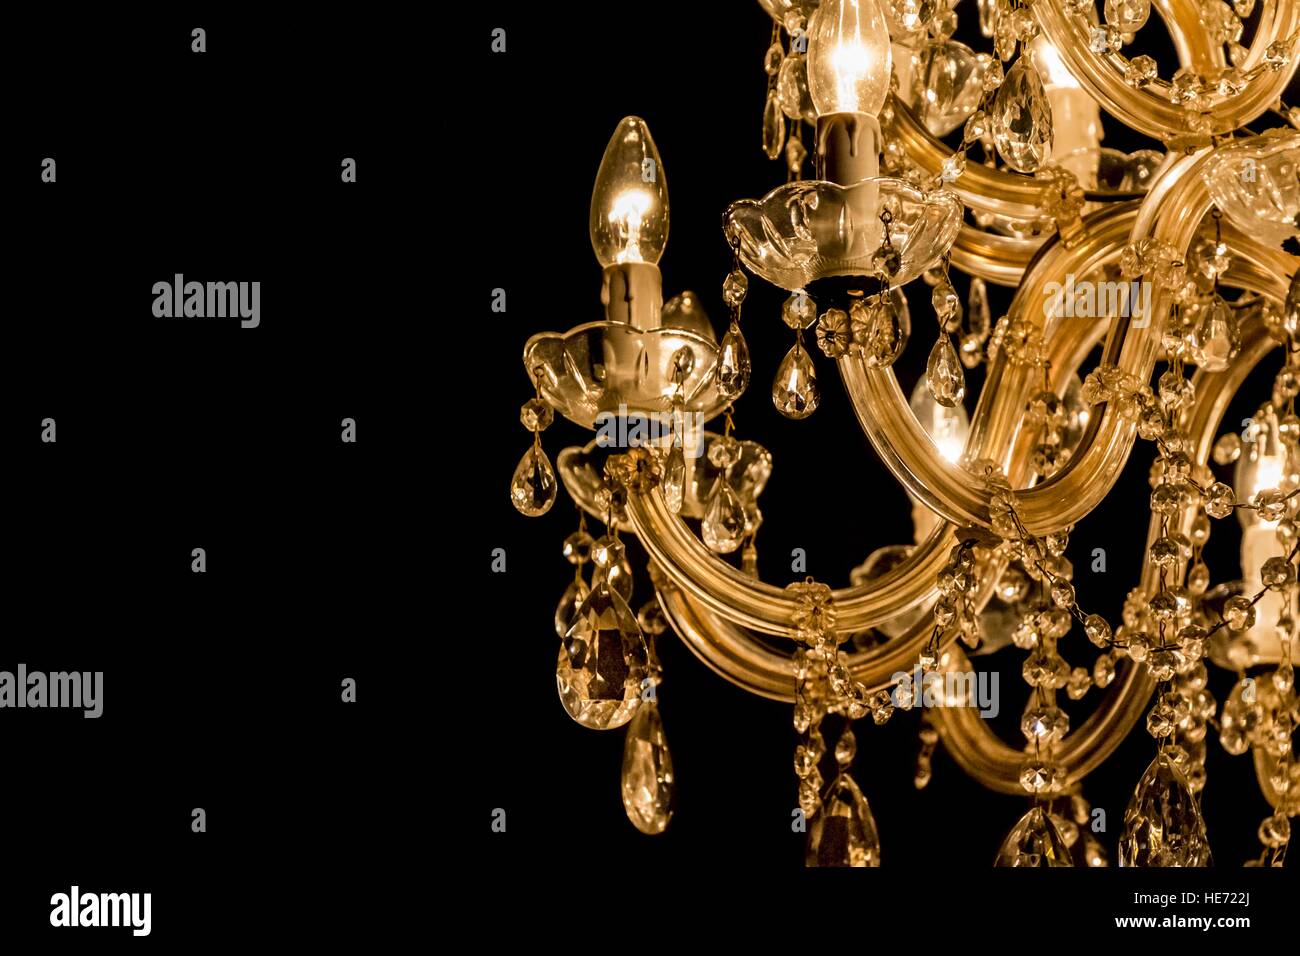 Gallant chandelier with light candles and dark side background. Luxury  candelabra hanging on ceiling with lots of little gems. Black background  Stock Photo - Alamy